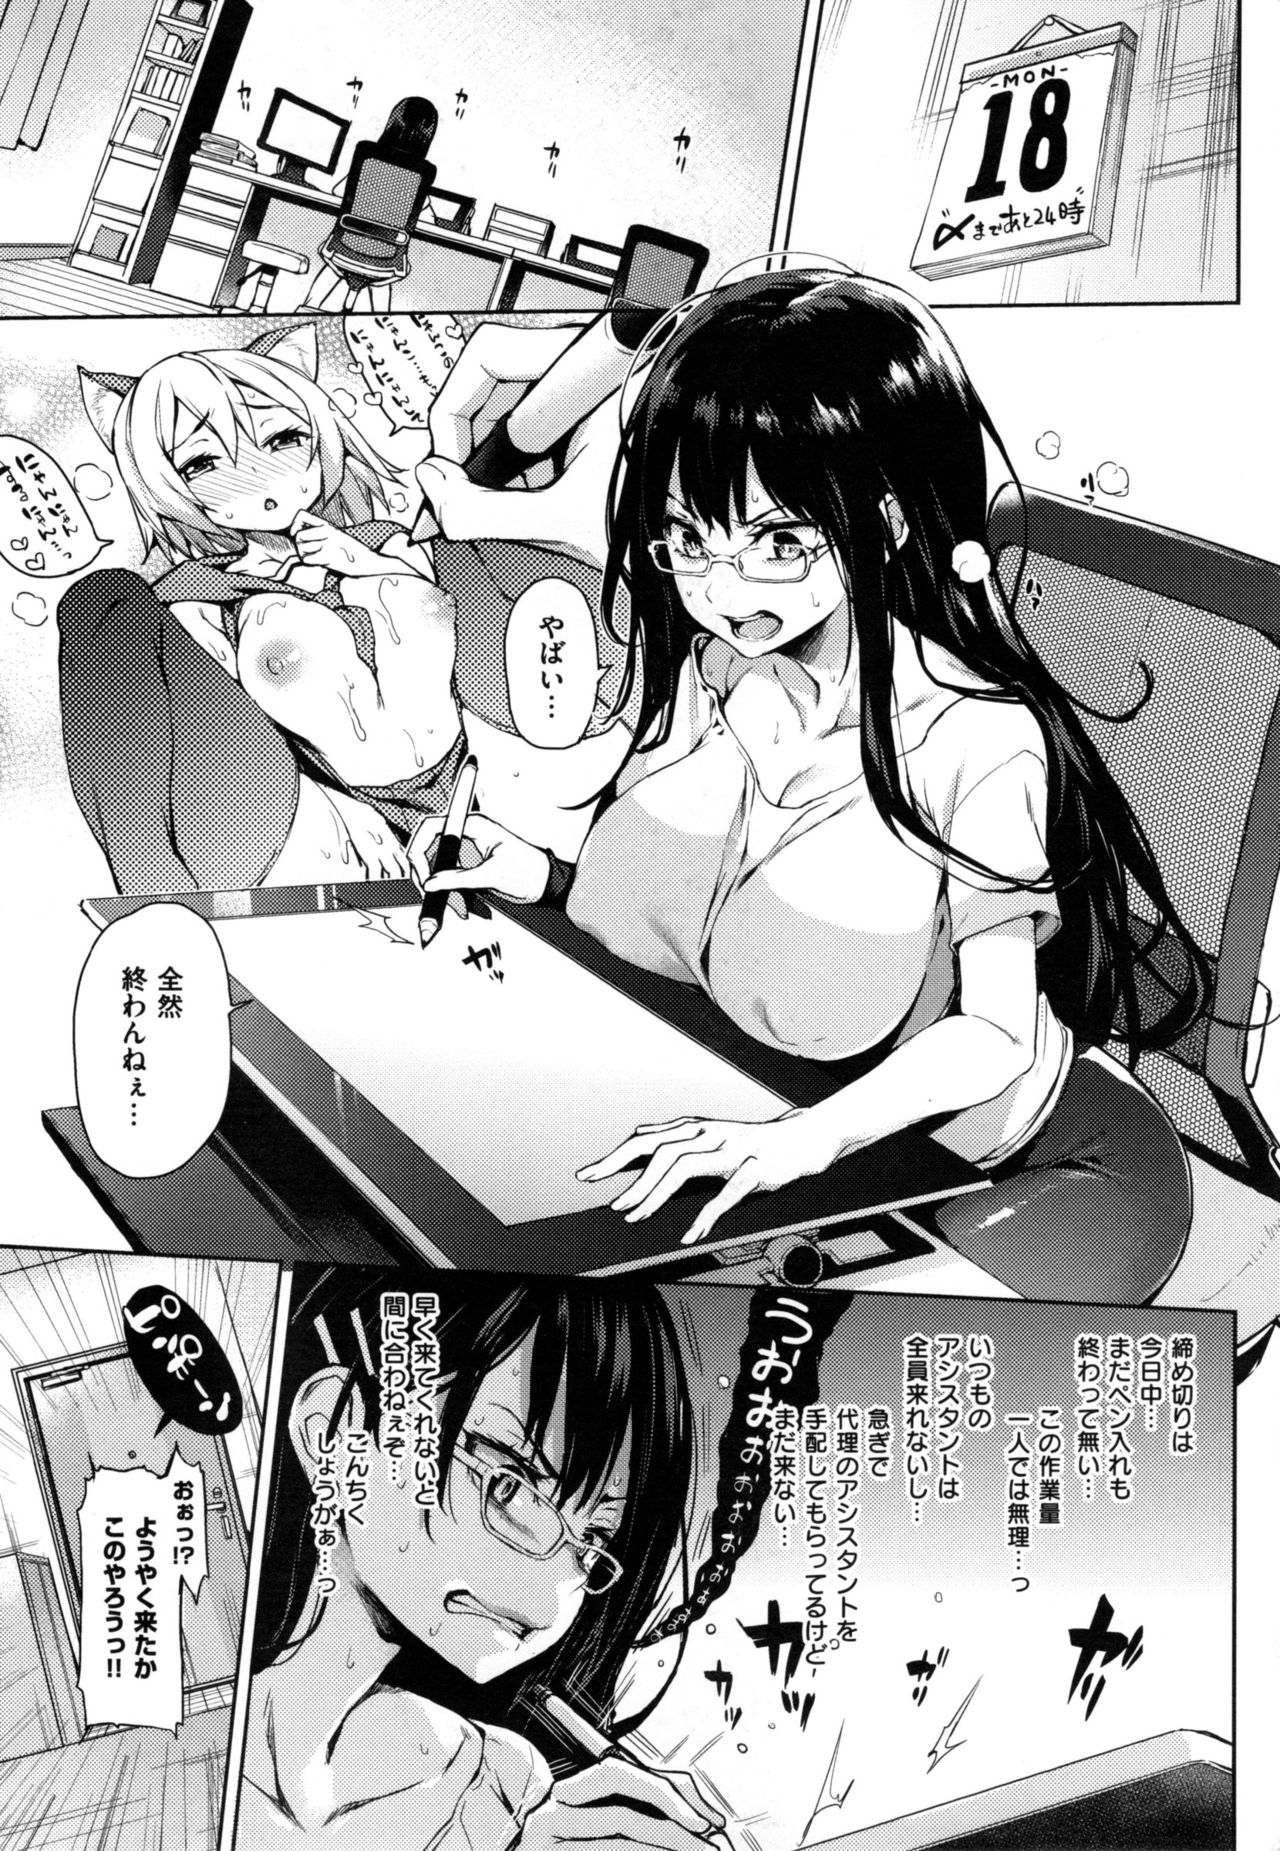 [Michiking] Shujuu Ecstasy - Sexual Relation of Master and Servant.  - page 14 full